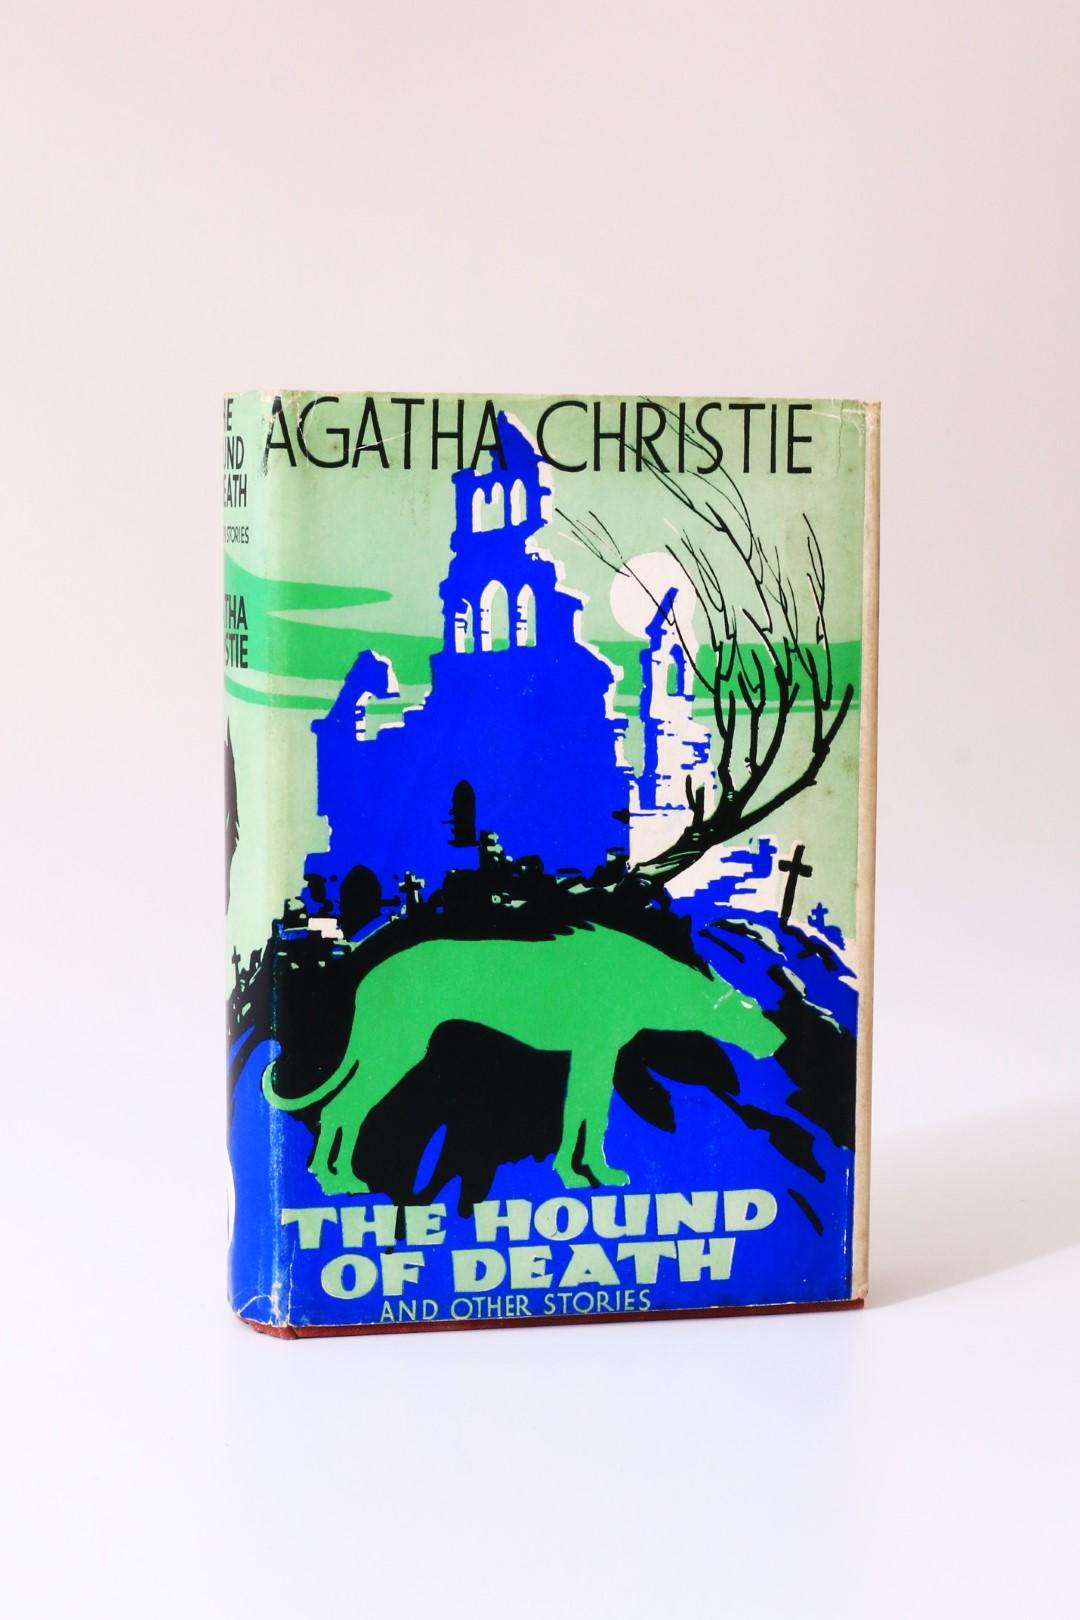 Agatha Christie - The Hound of Death - Odhams Press, 1933, First Edition.